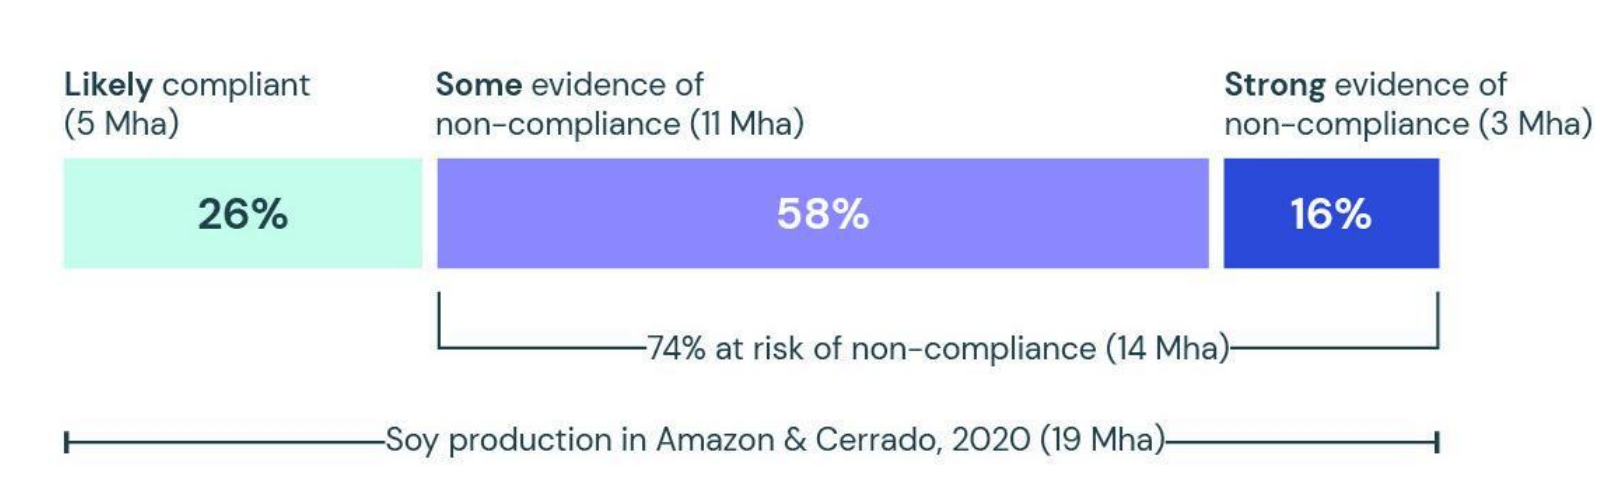 Soy production in the Amazon and Cerrado: 26% likely compliant, 58% some evidence of non-compliance, 16% strong evidence of non-compliance. Overall, 74% at risk of non-compliance, 14 million hectares.